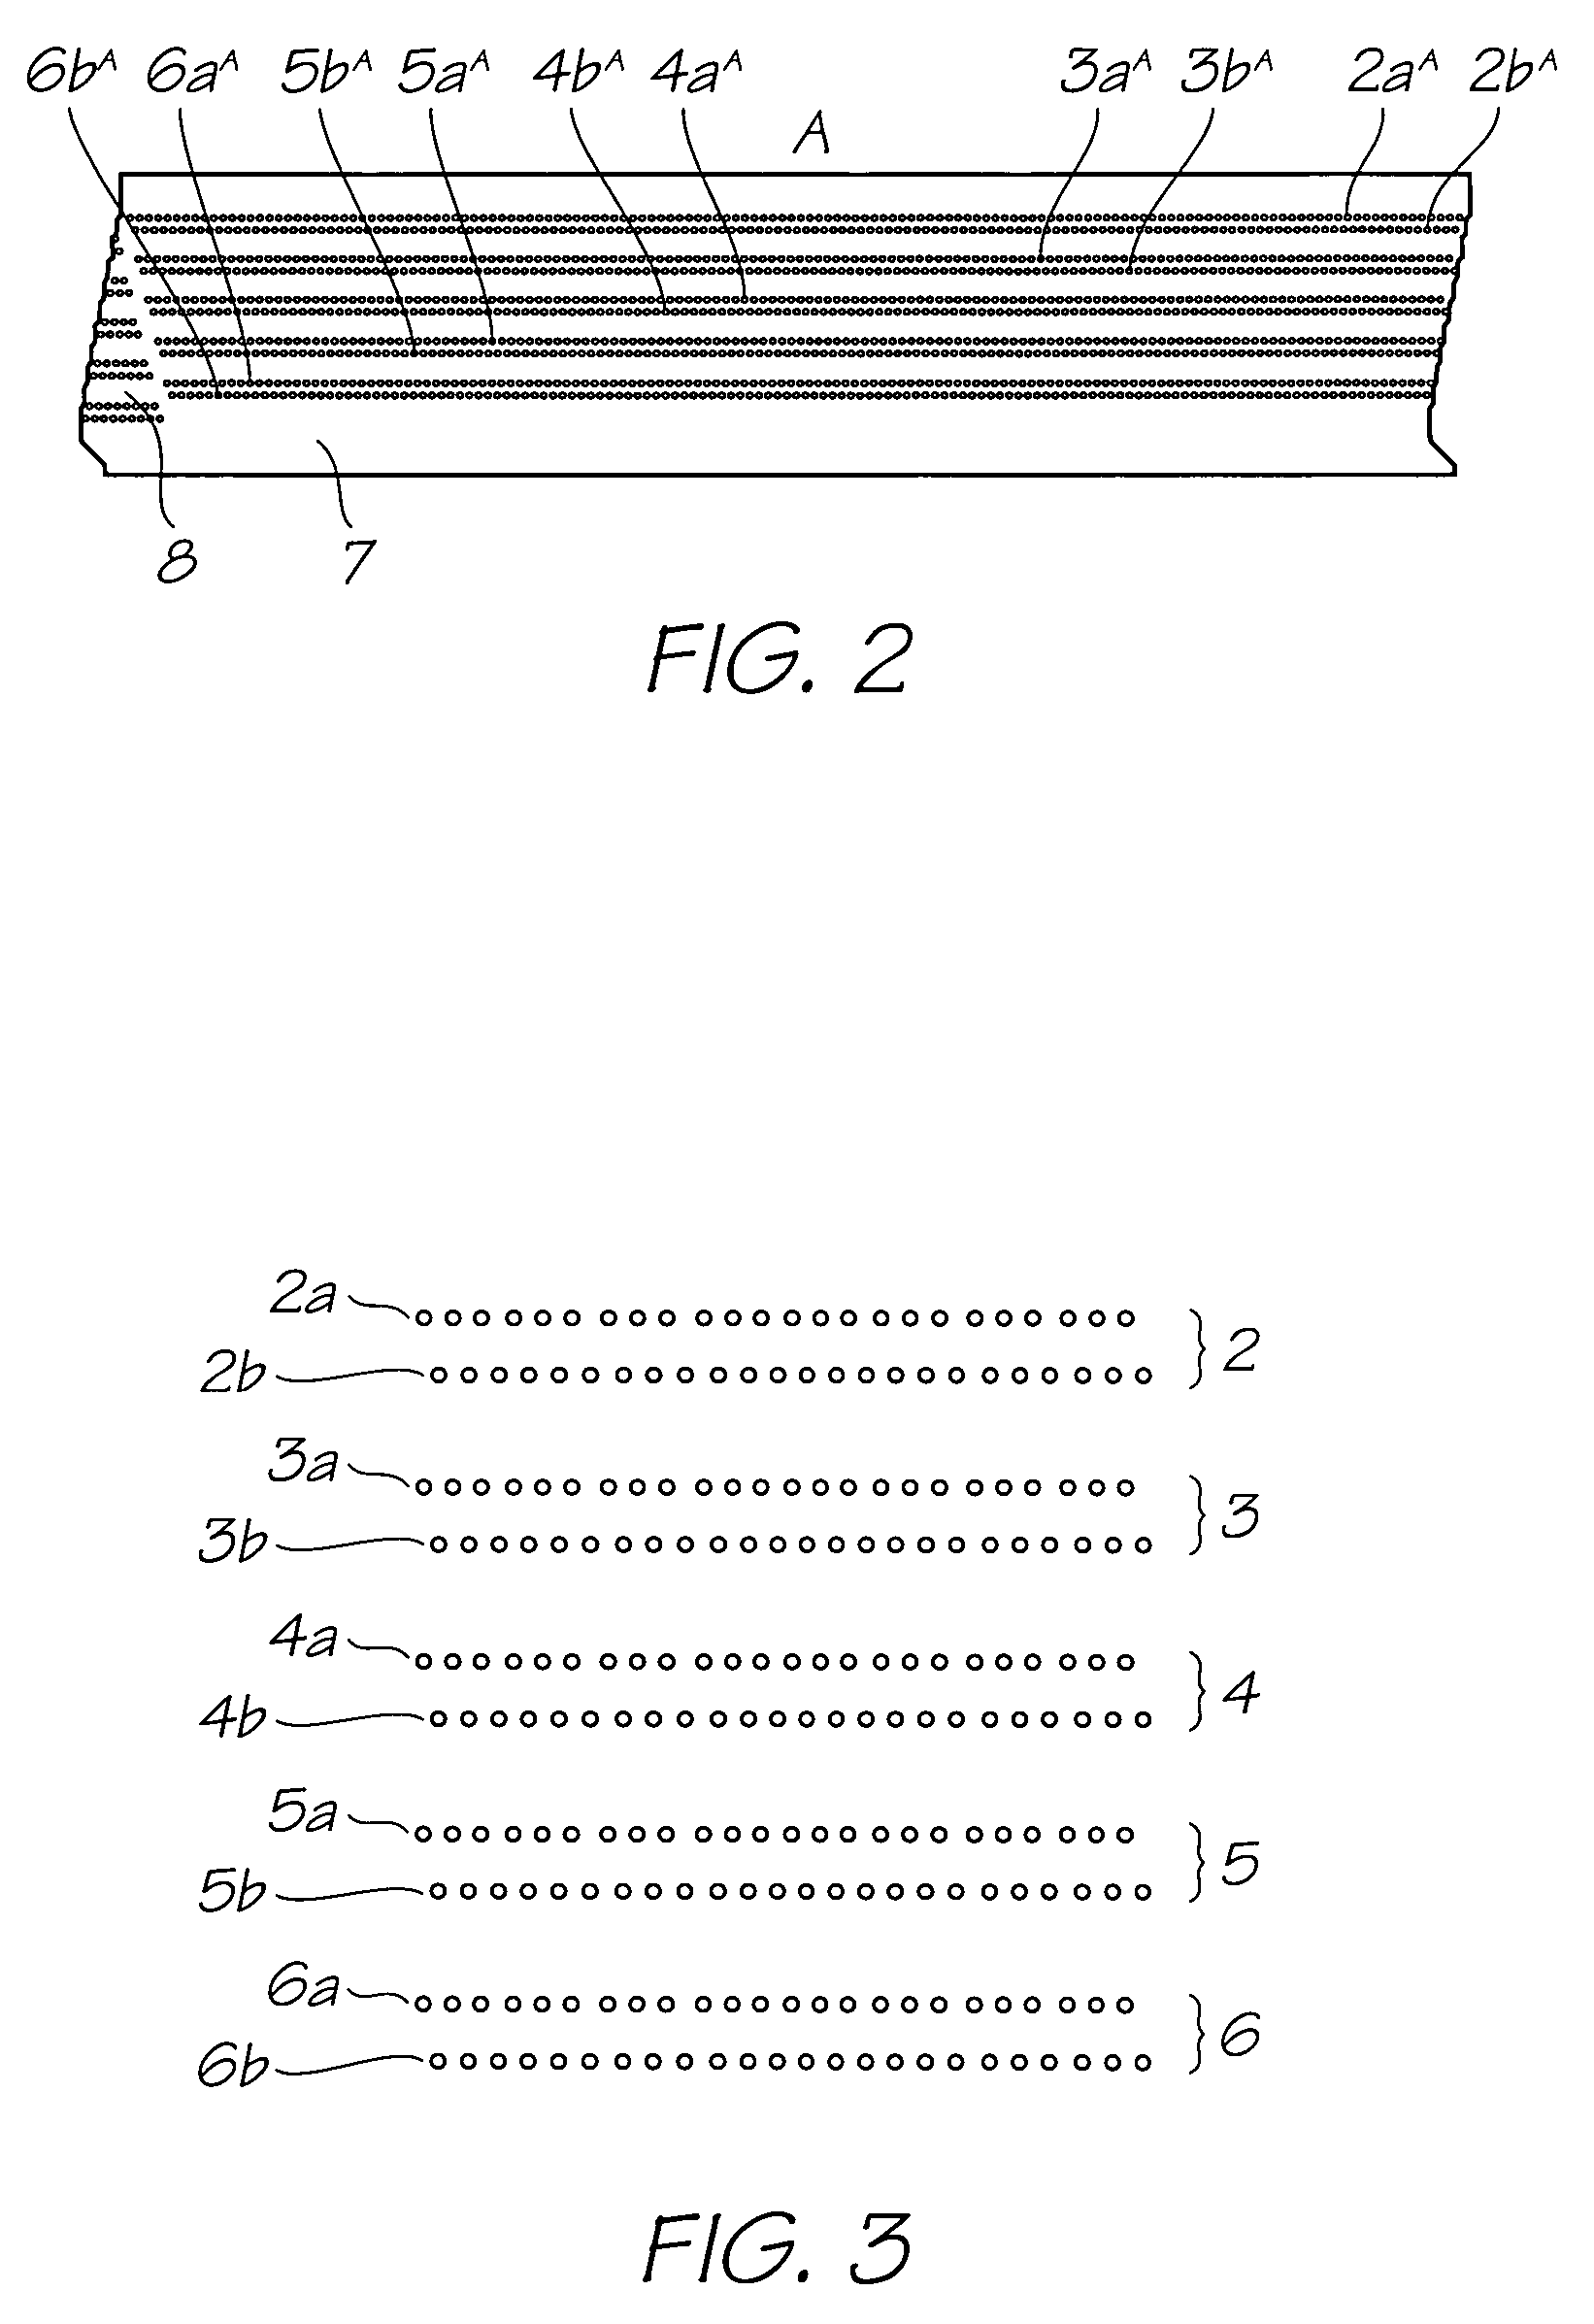 Method of modulating printhead peak power requirement using out-of-phase firing